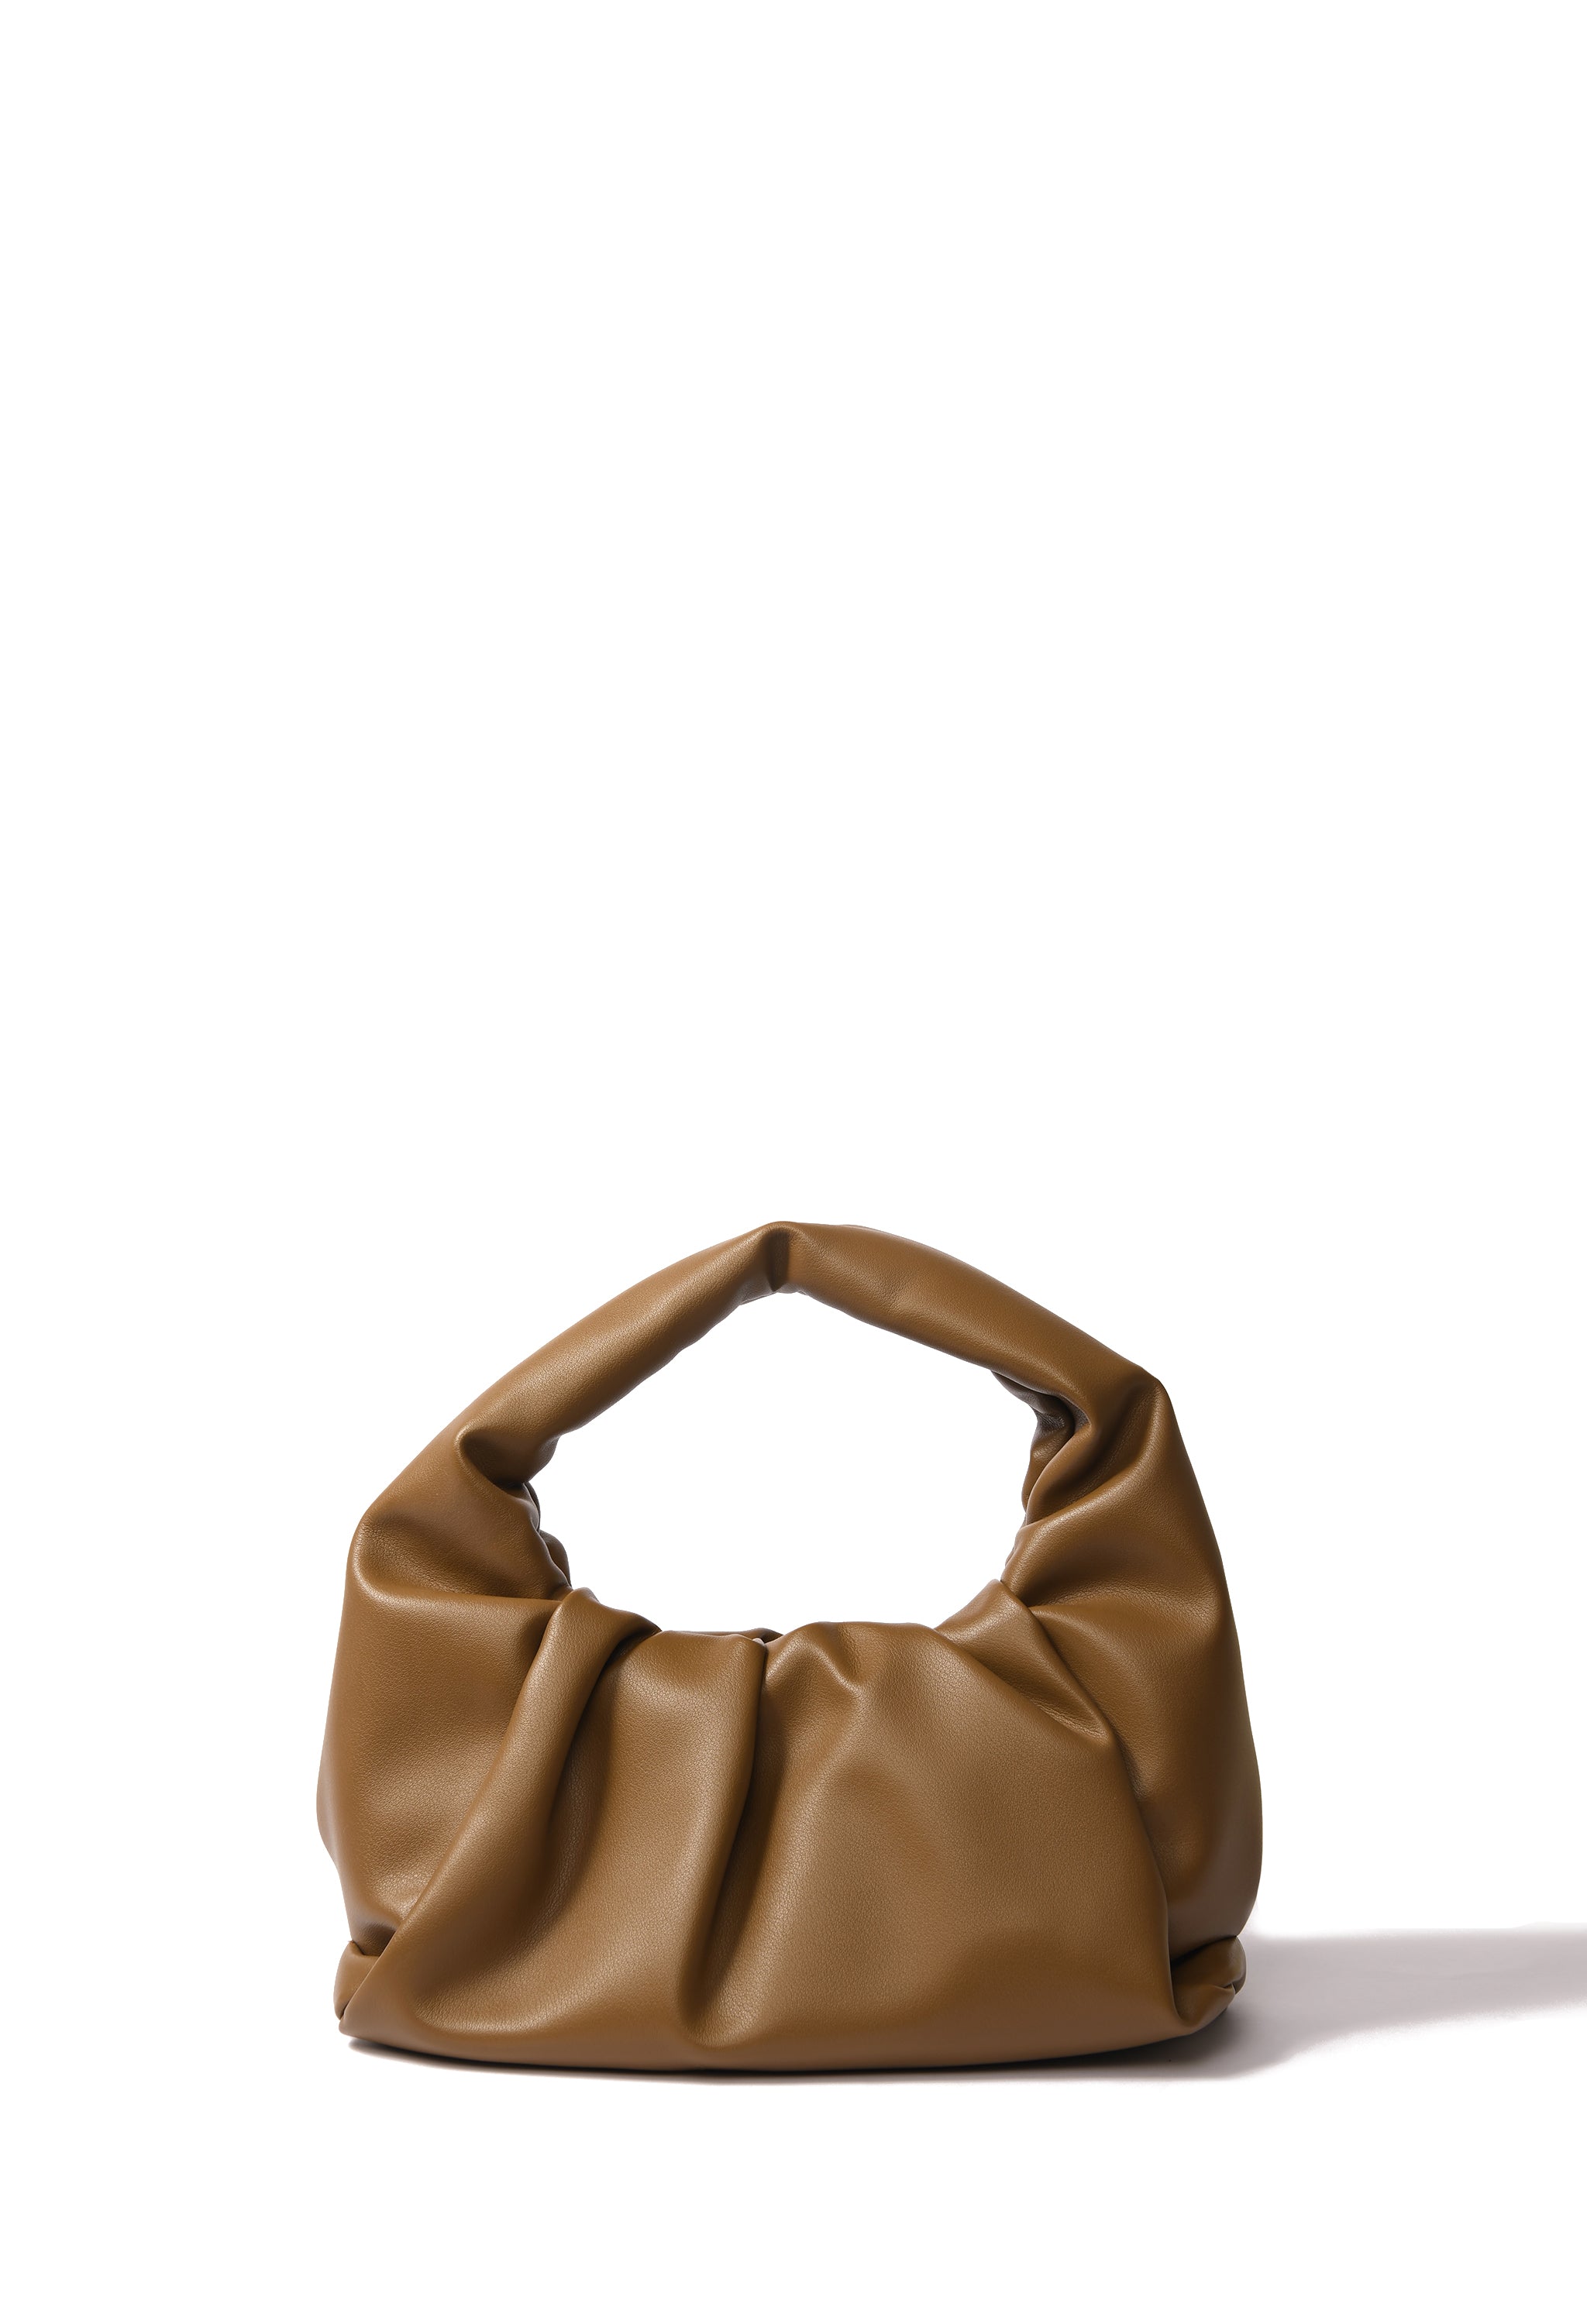 Marshmallow croissant bag in soft leather, Mustard Green BOB ORE blue collection on sale 2022